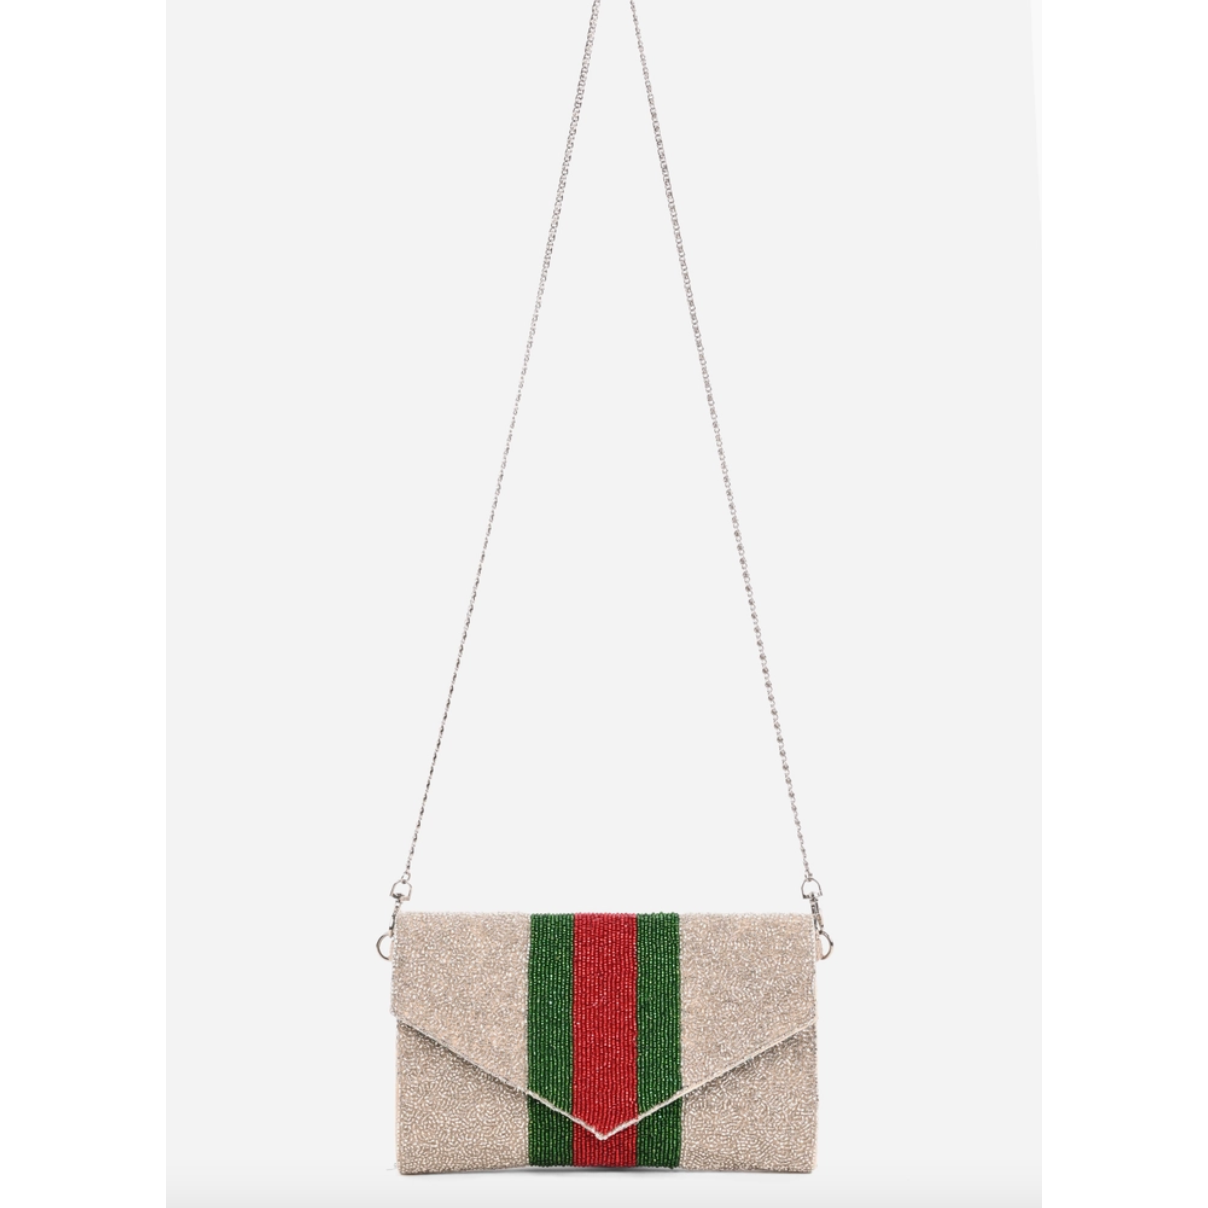 Green & Red Striped Beaded Clutch